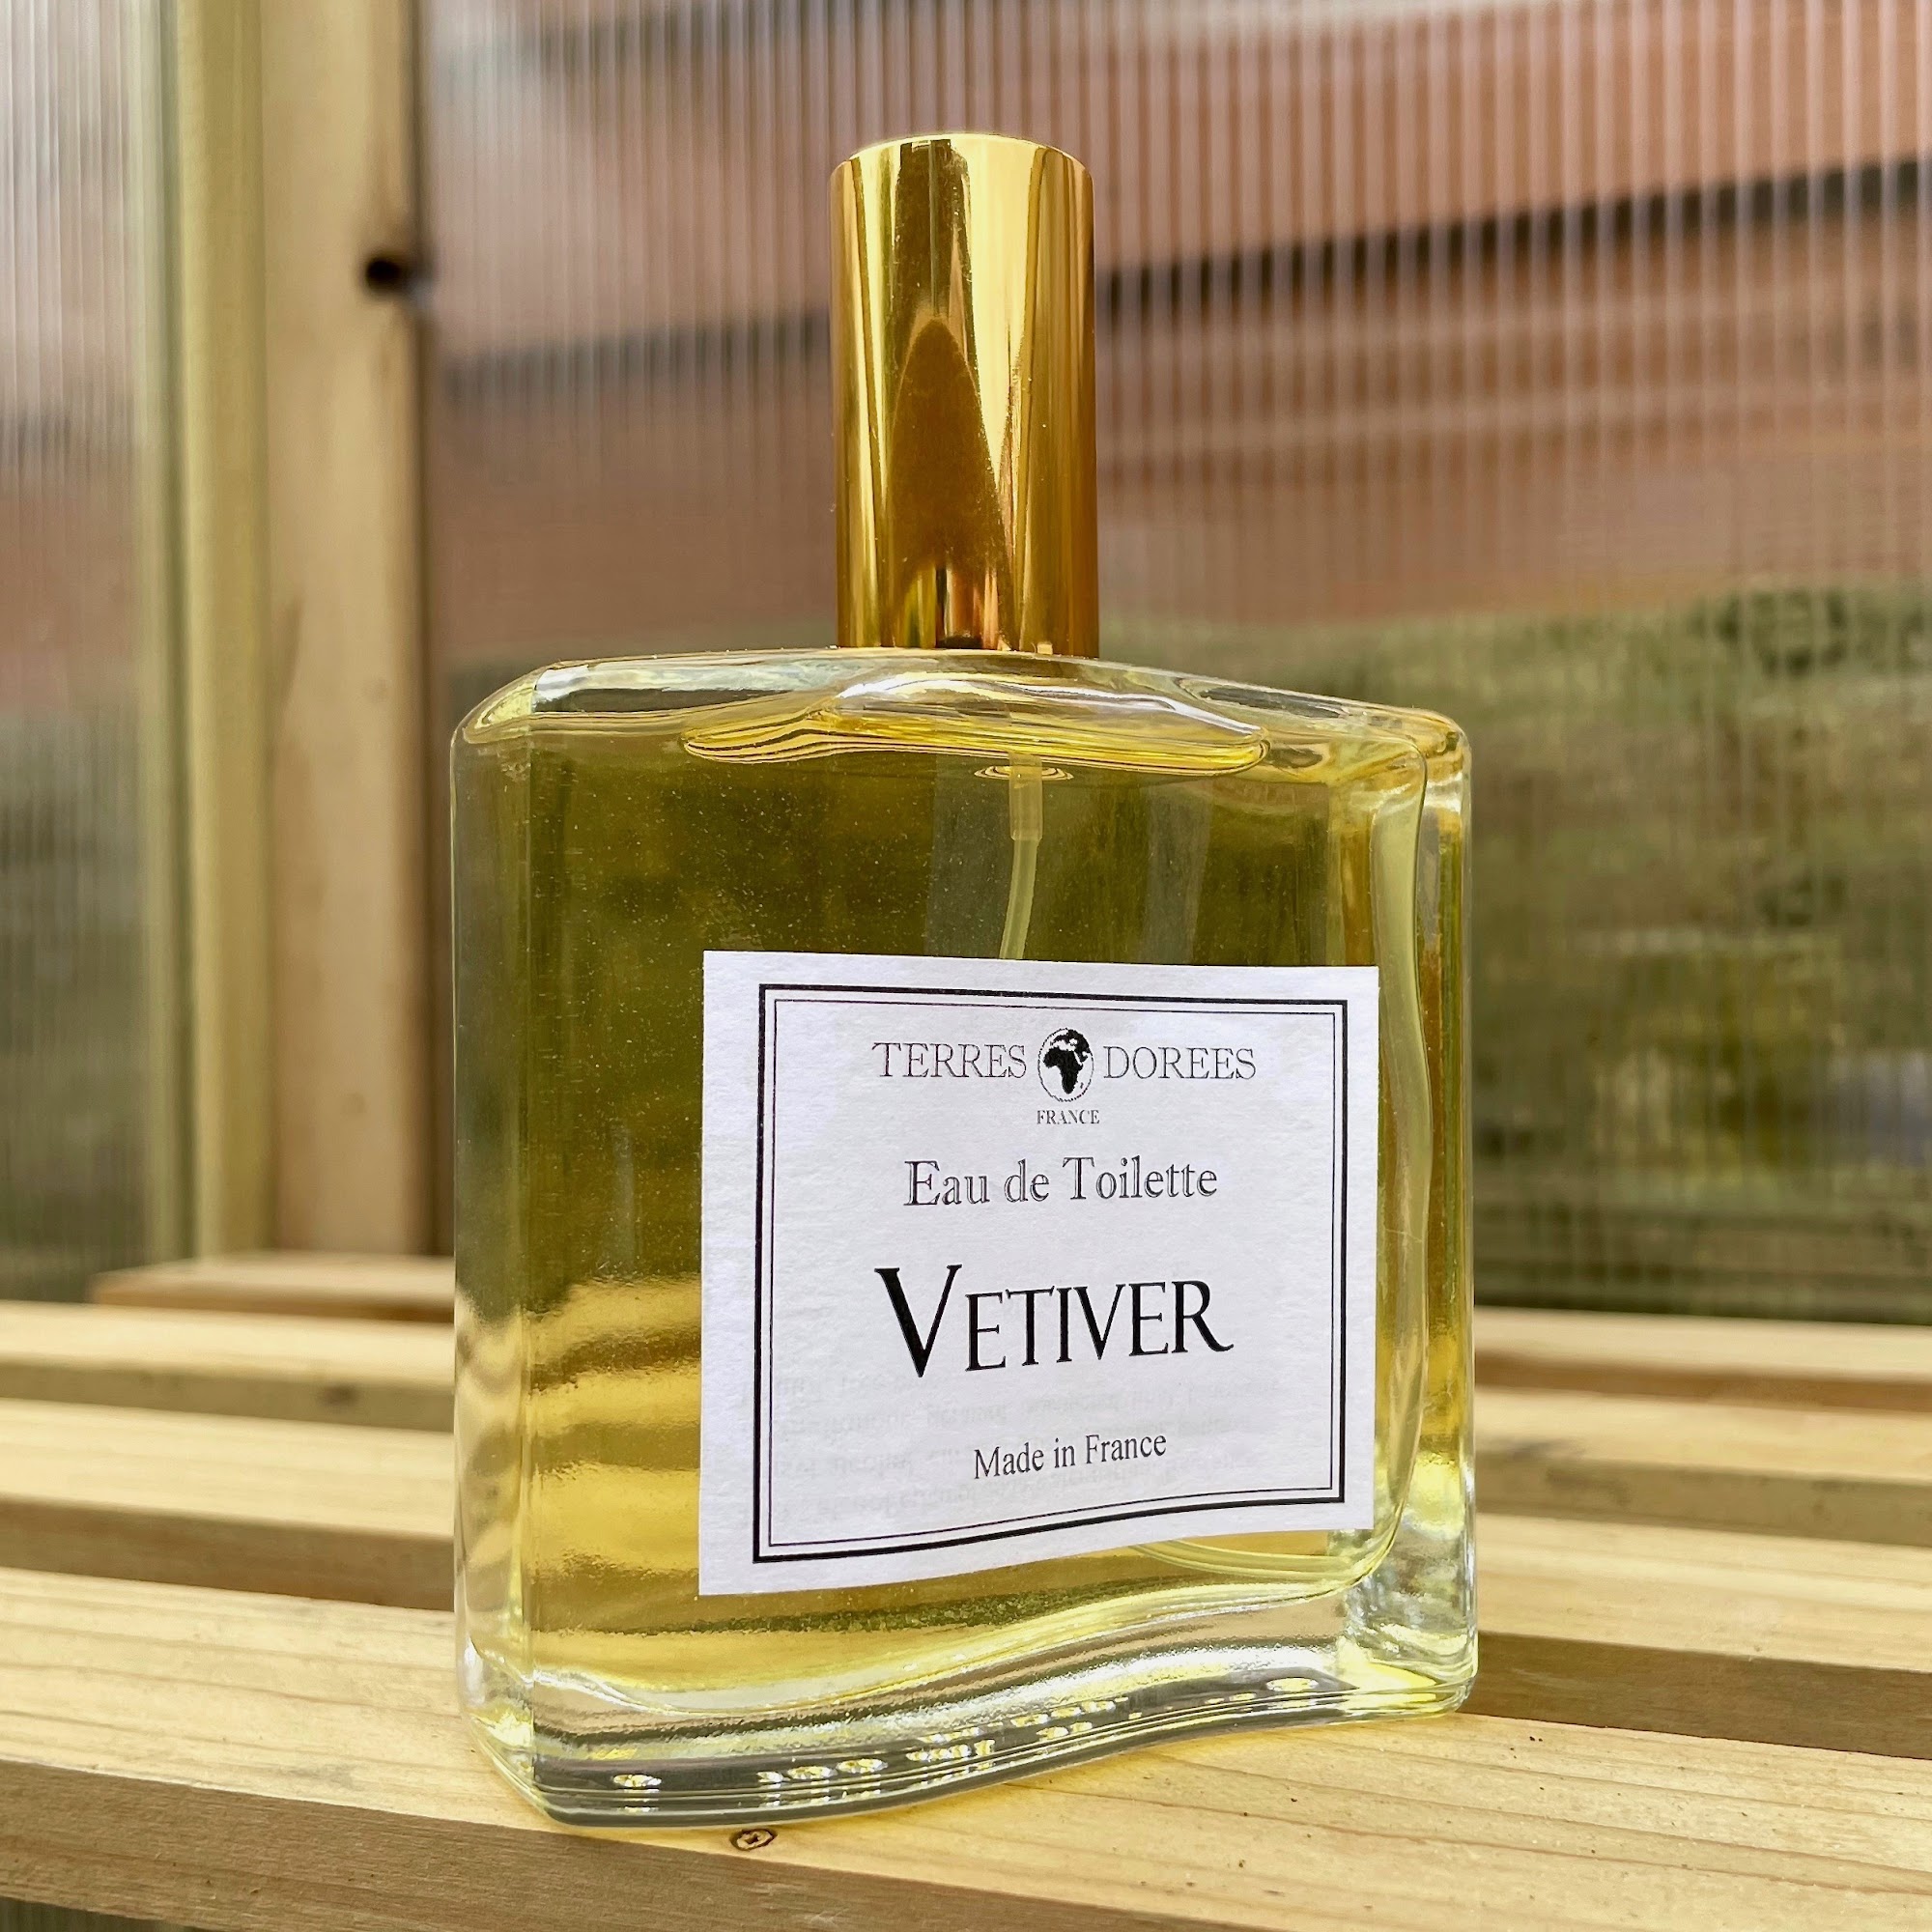 A bottle of Vetiver fragrance by Terre Dorees